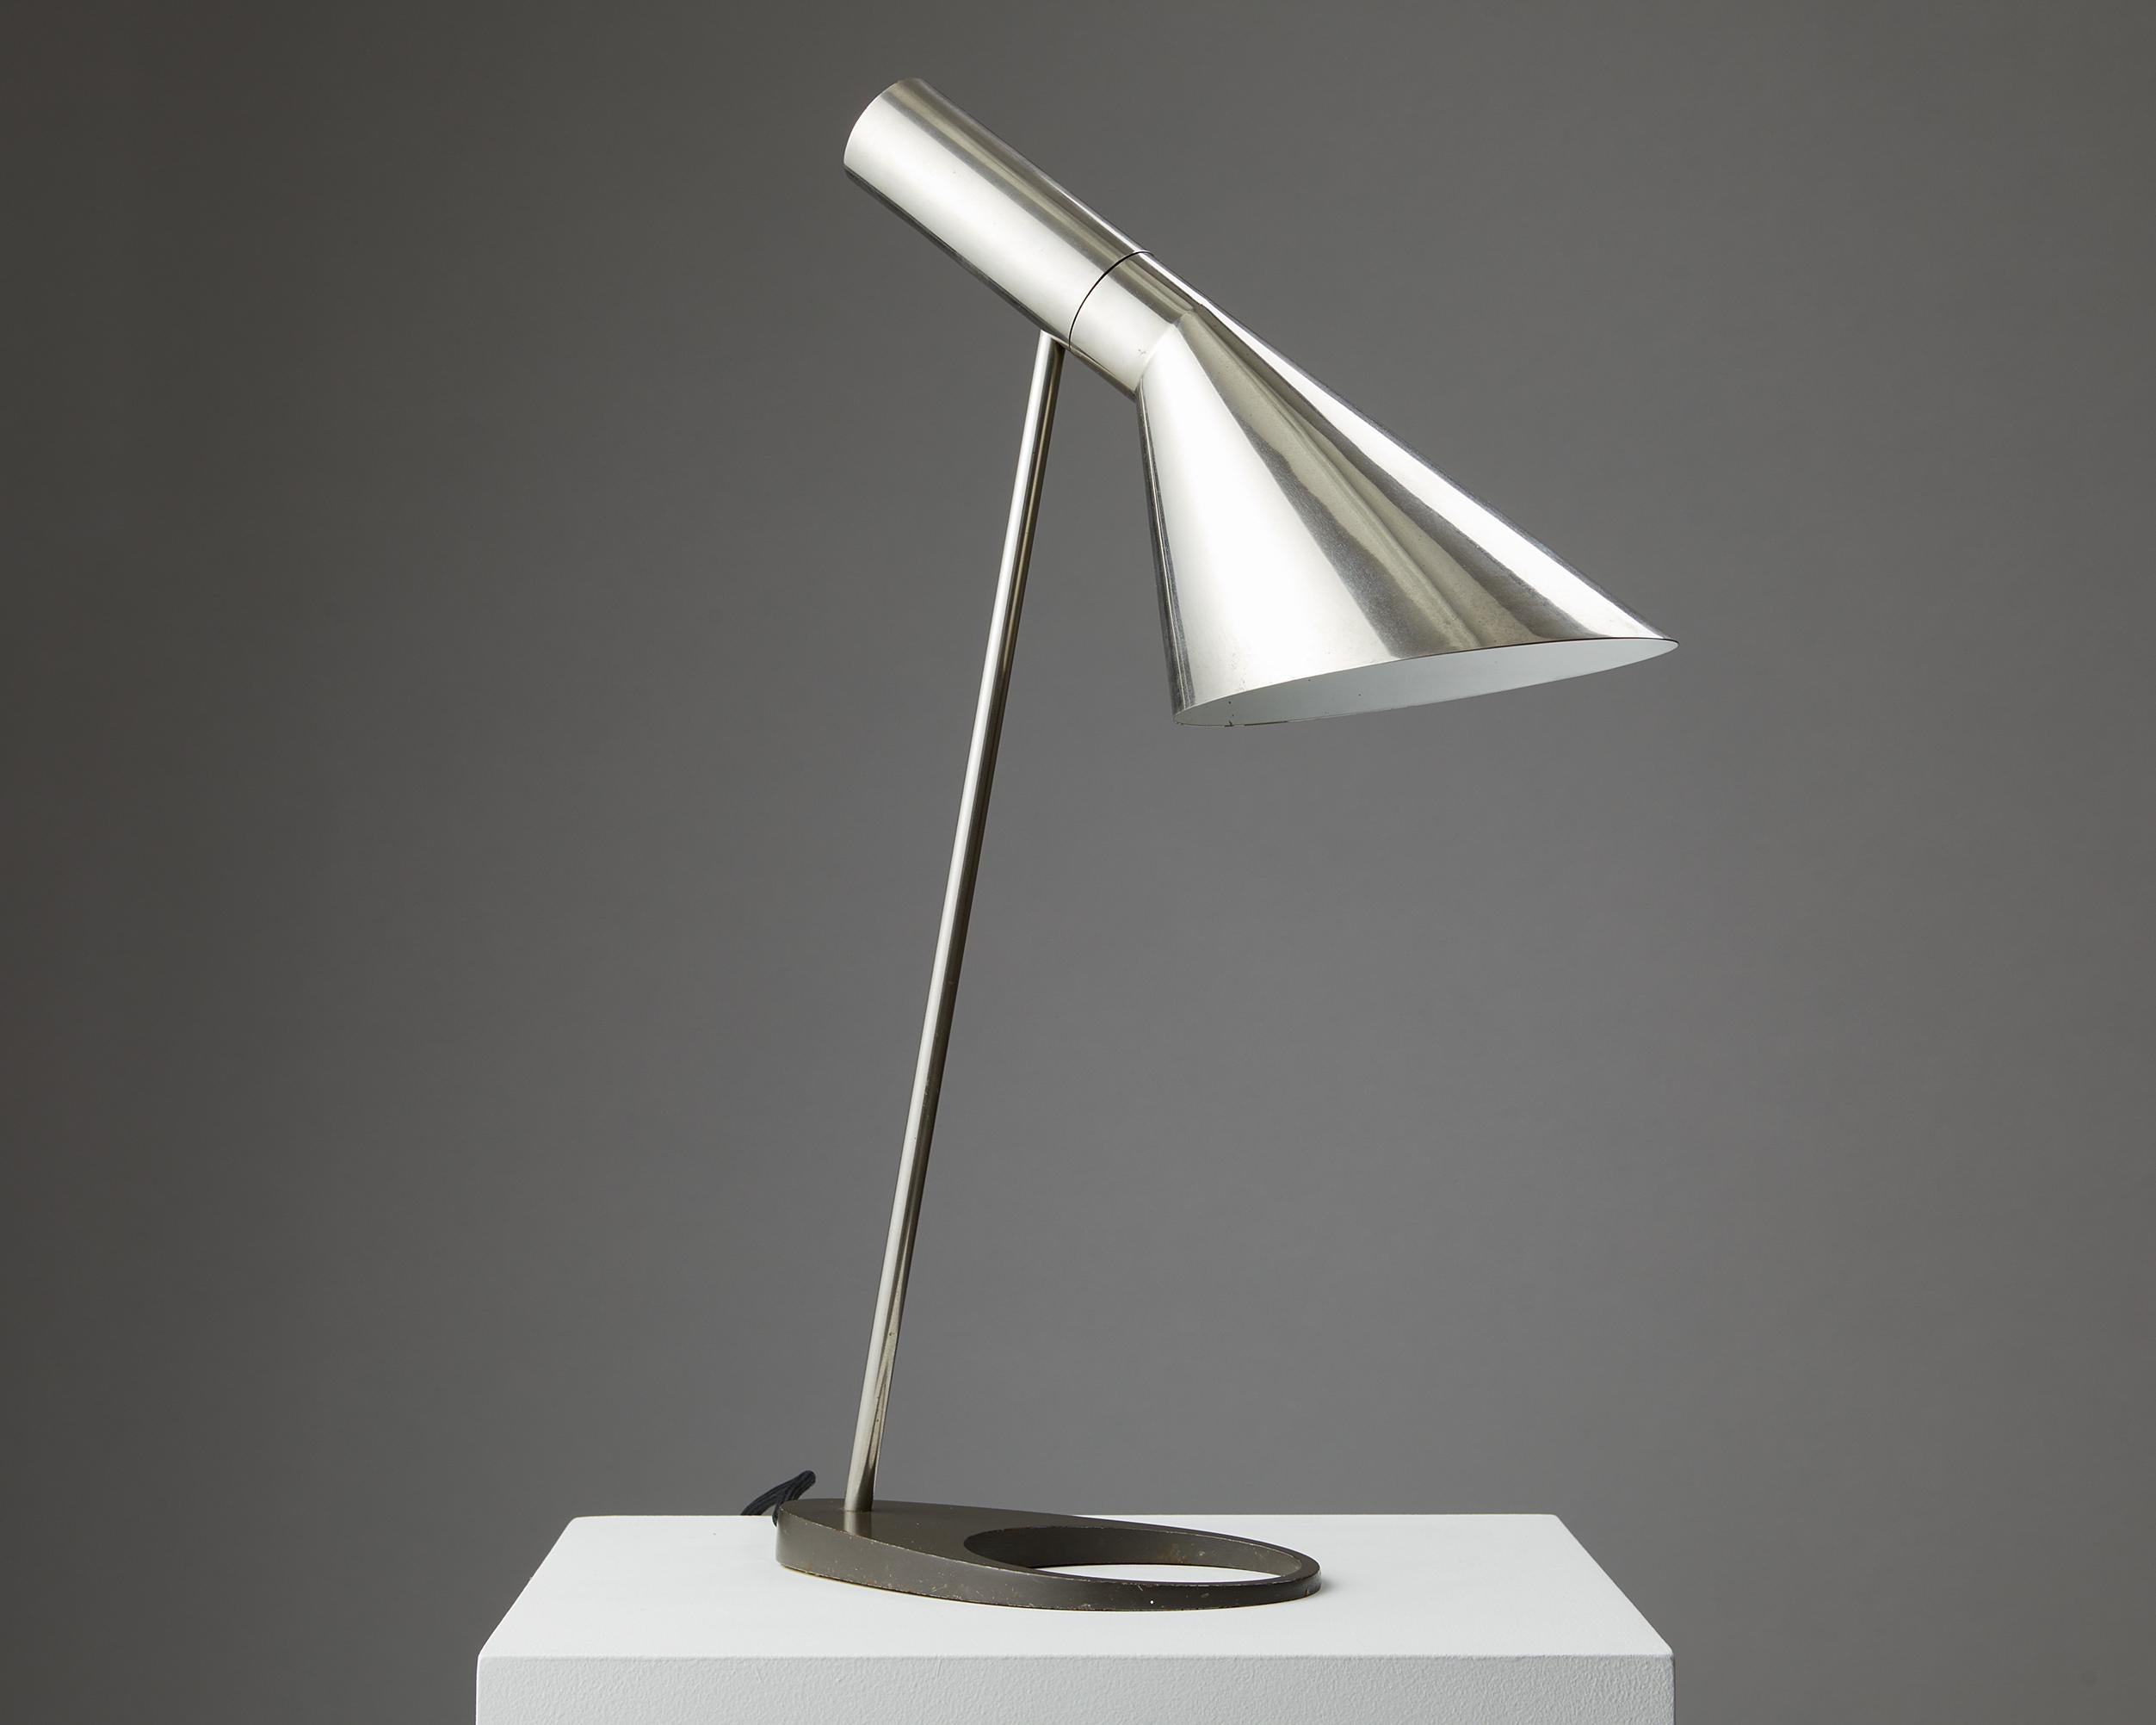 Table lamp model AJ designed by Arne Jacobsen for Louis Poulsen Entwurf,
Denmark. 1957.

Chrome-plated metal.

Early model without on / off switch.

Adjustable shade.

H: 53 cm / 1' 9